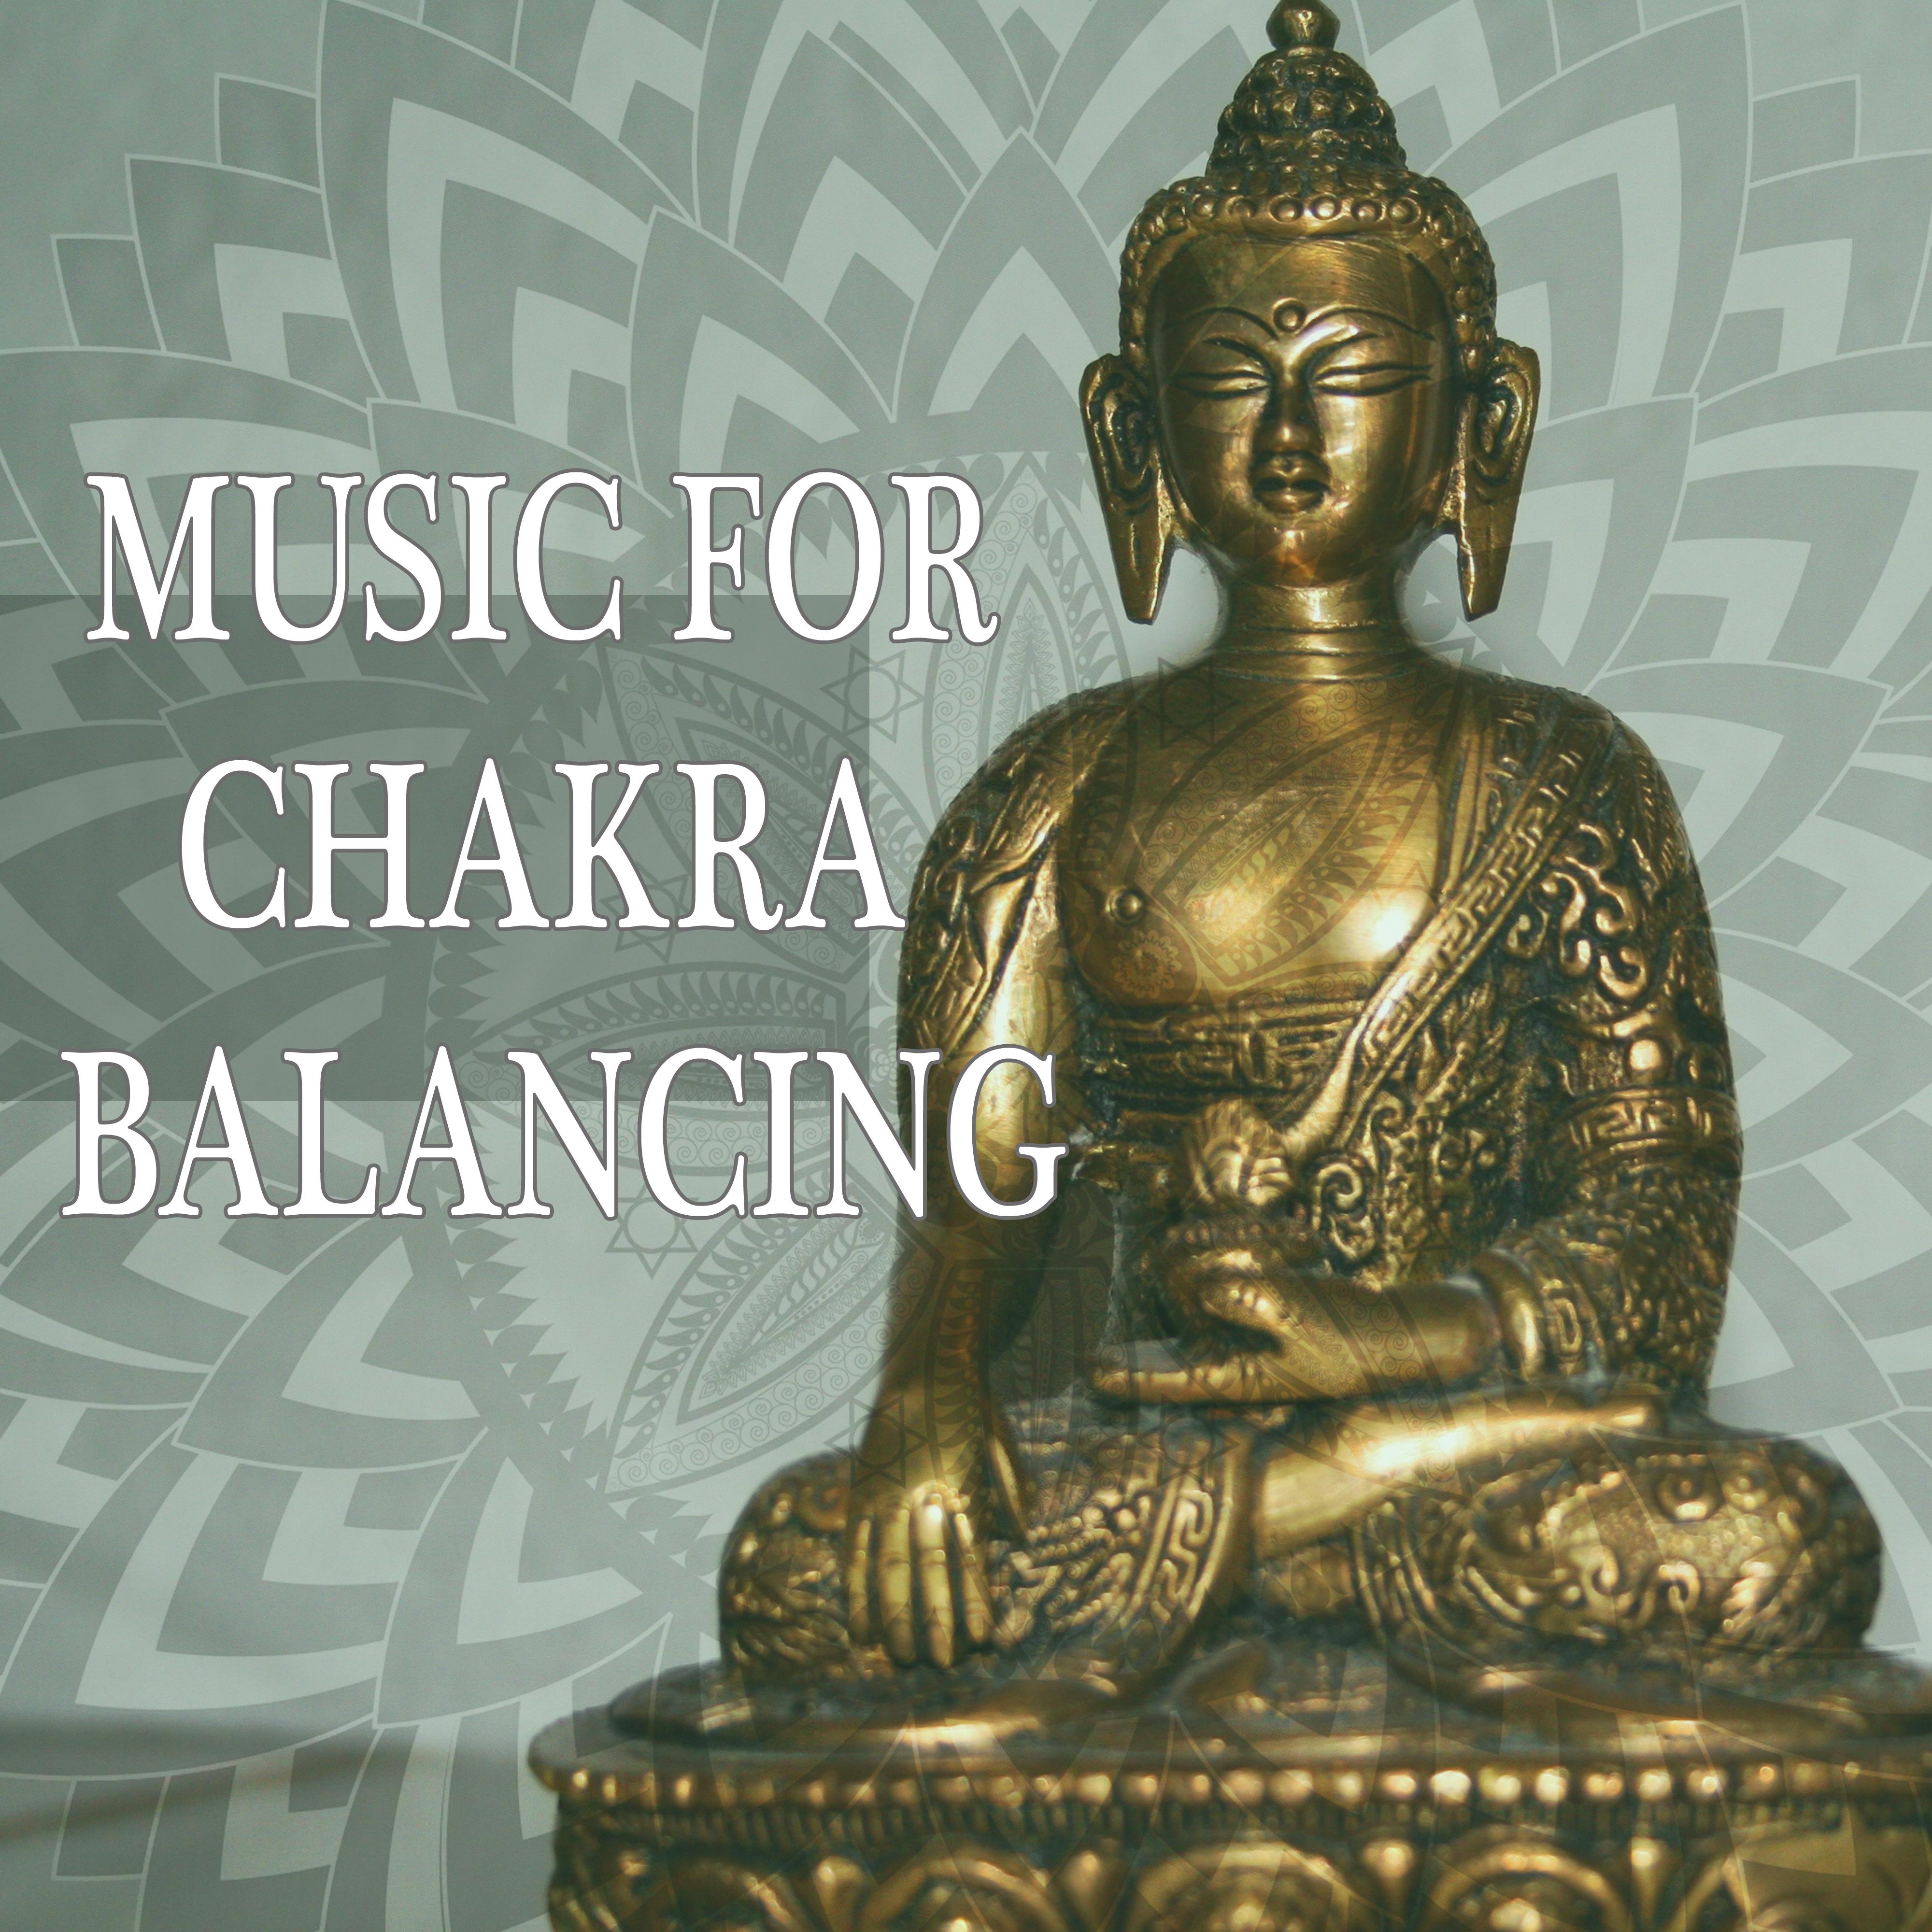 Music for Chakra Balancing  Meditation Calmness, Spirit Free, Inner Silence, Mind Peace, New Age Relaxation